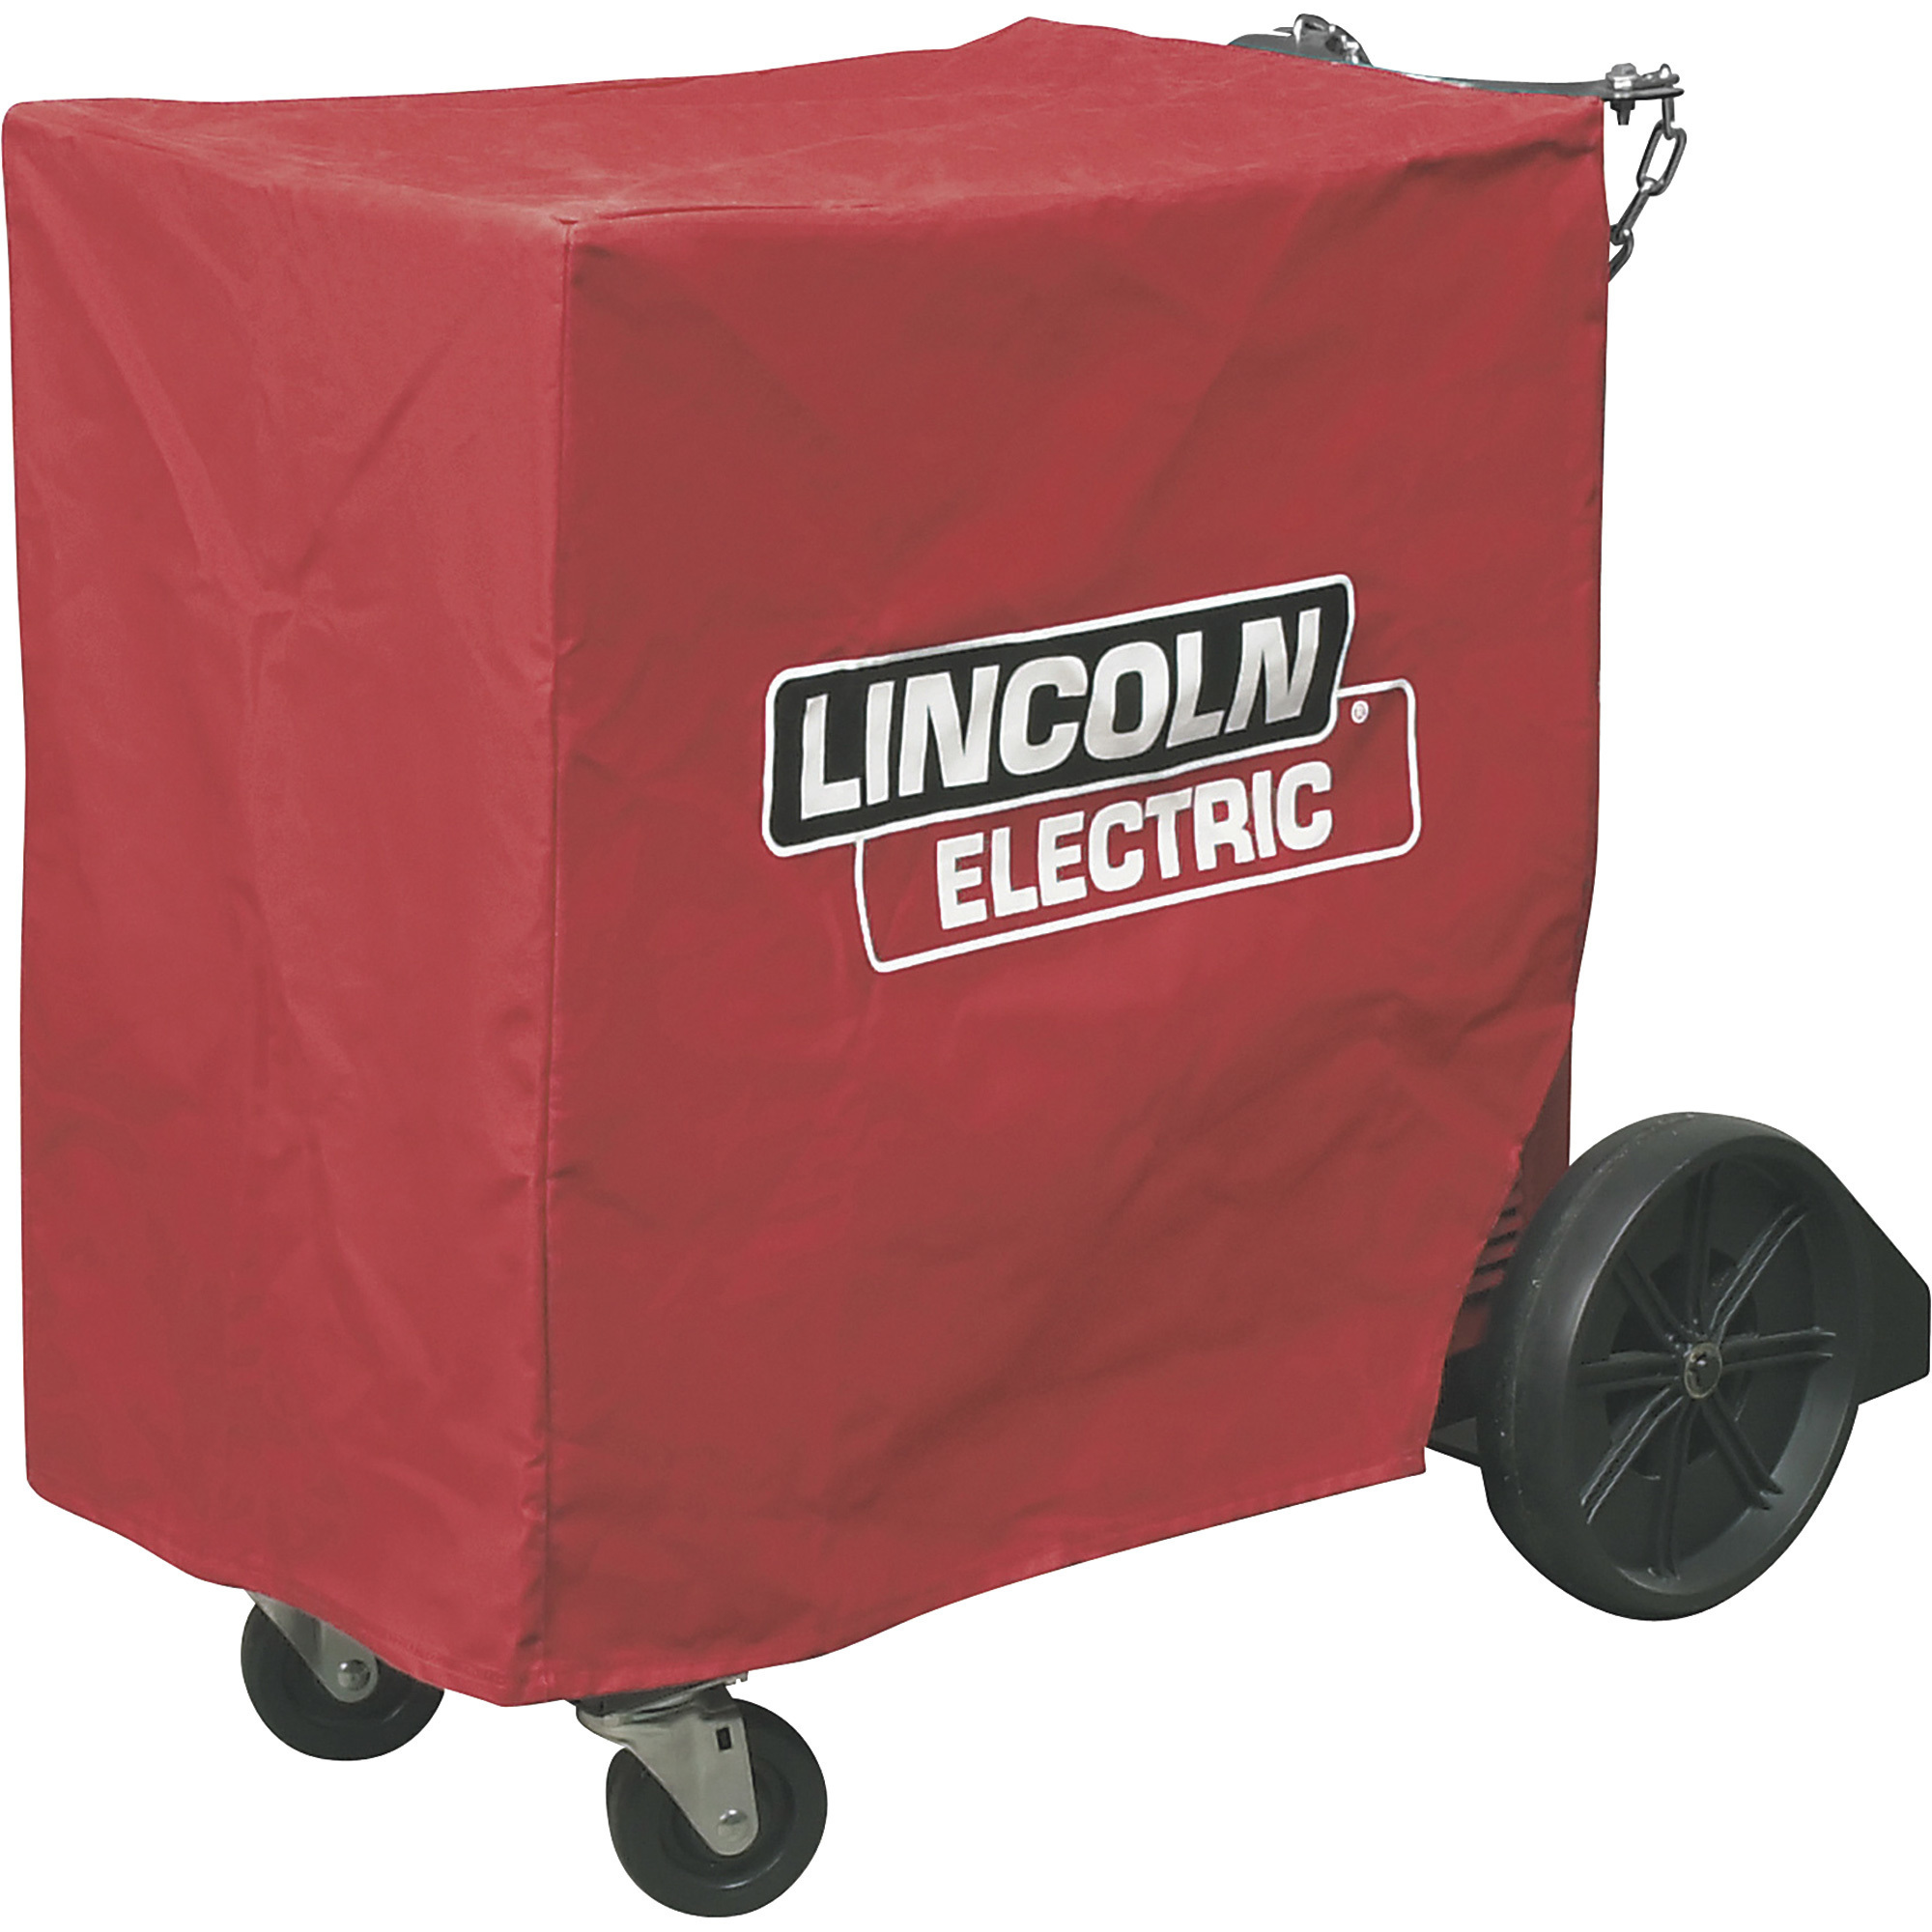 Lincoln Electric Canvas Welder Cover, Fits Power MIG Welders, Model K2378-1